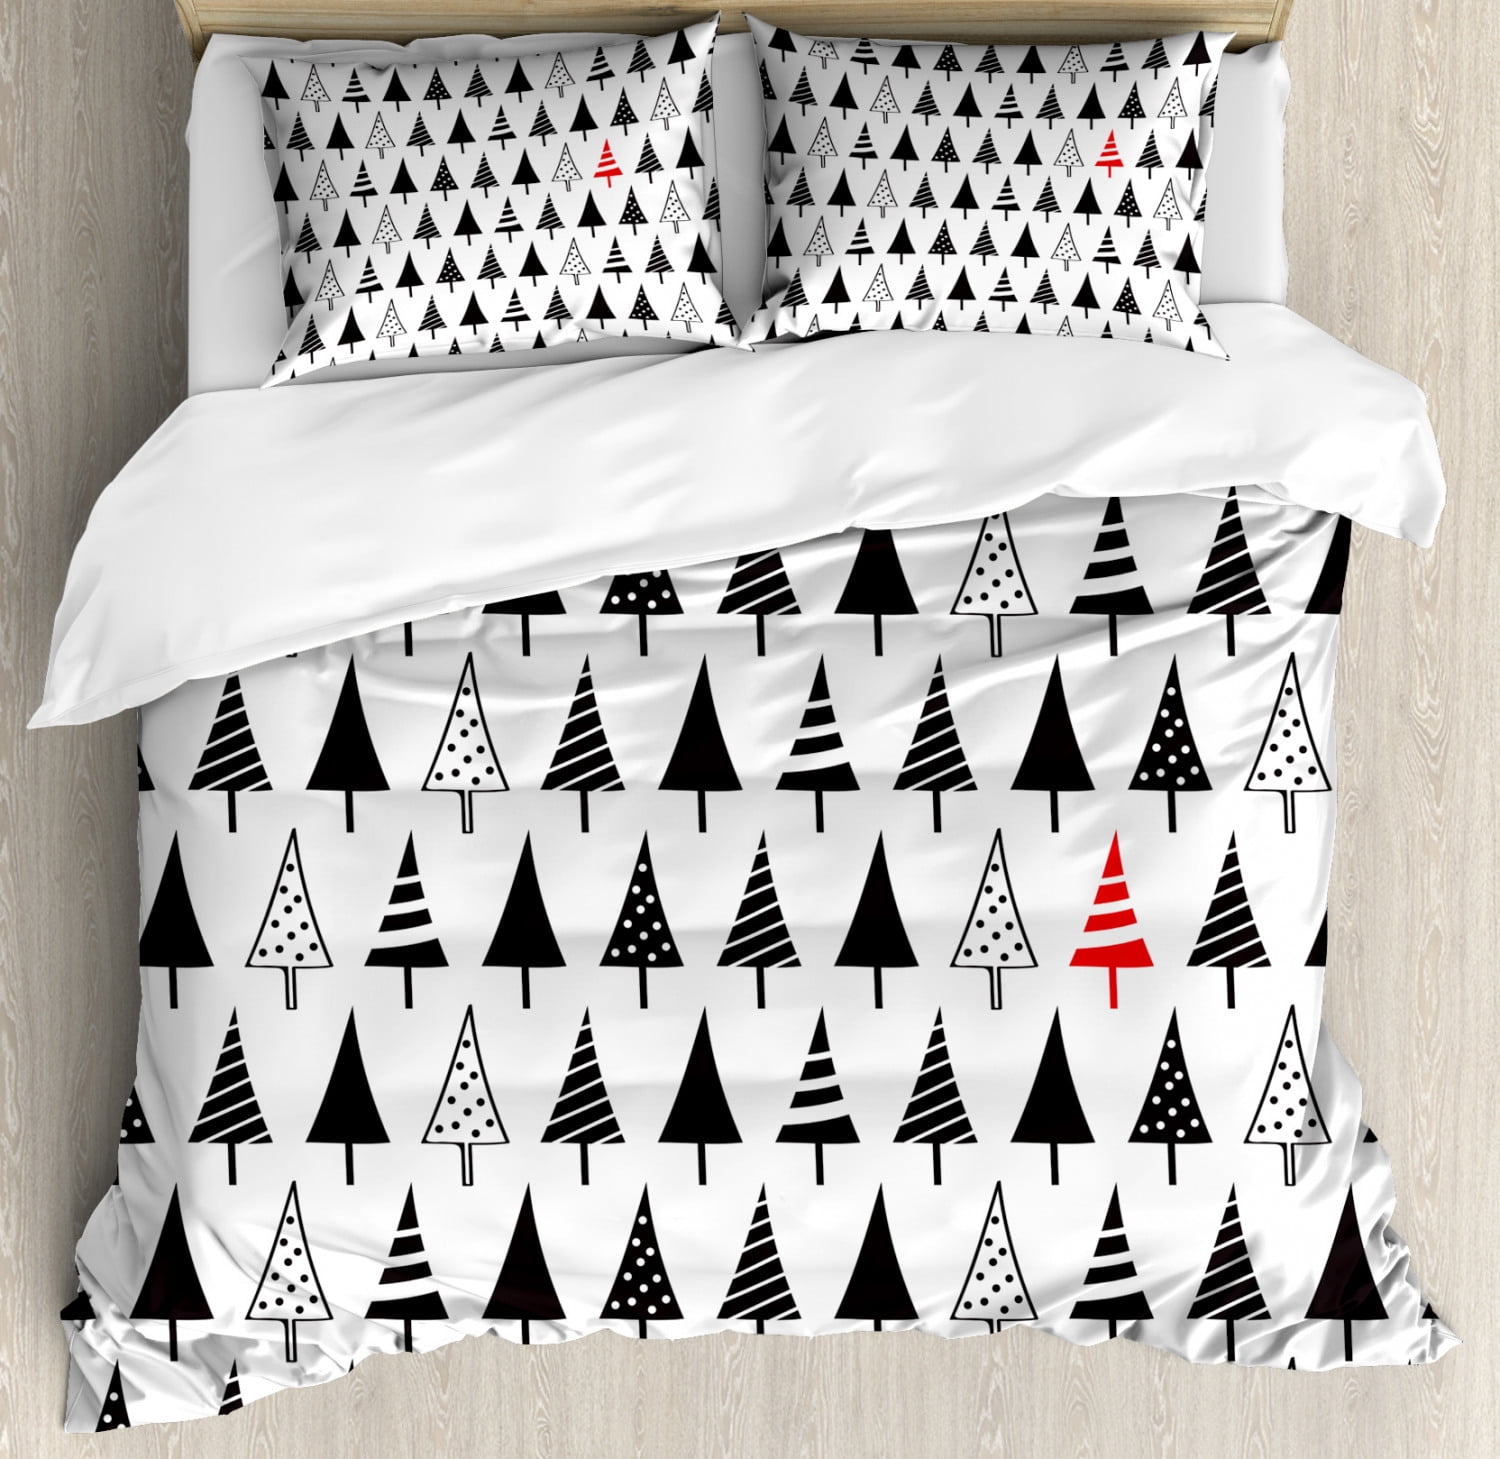 Queen Size Duvet Cover Set, Red Black And White Duvet Covers